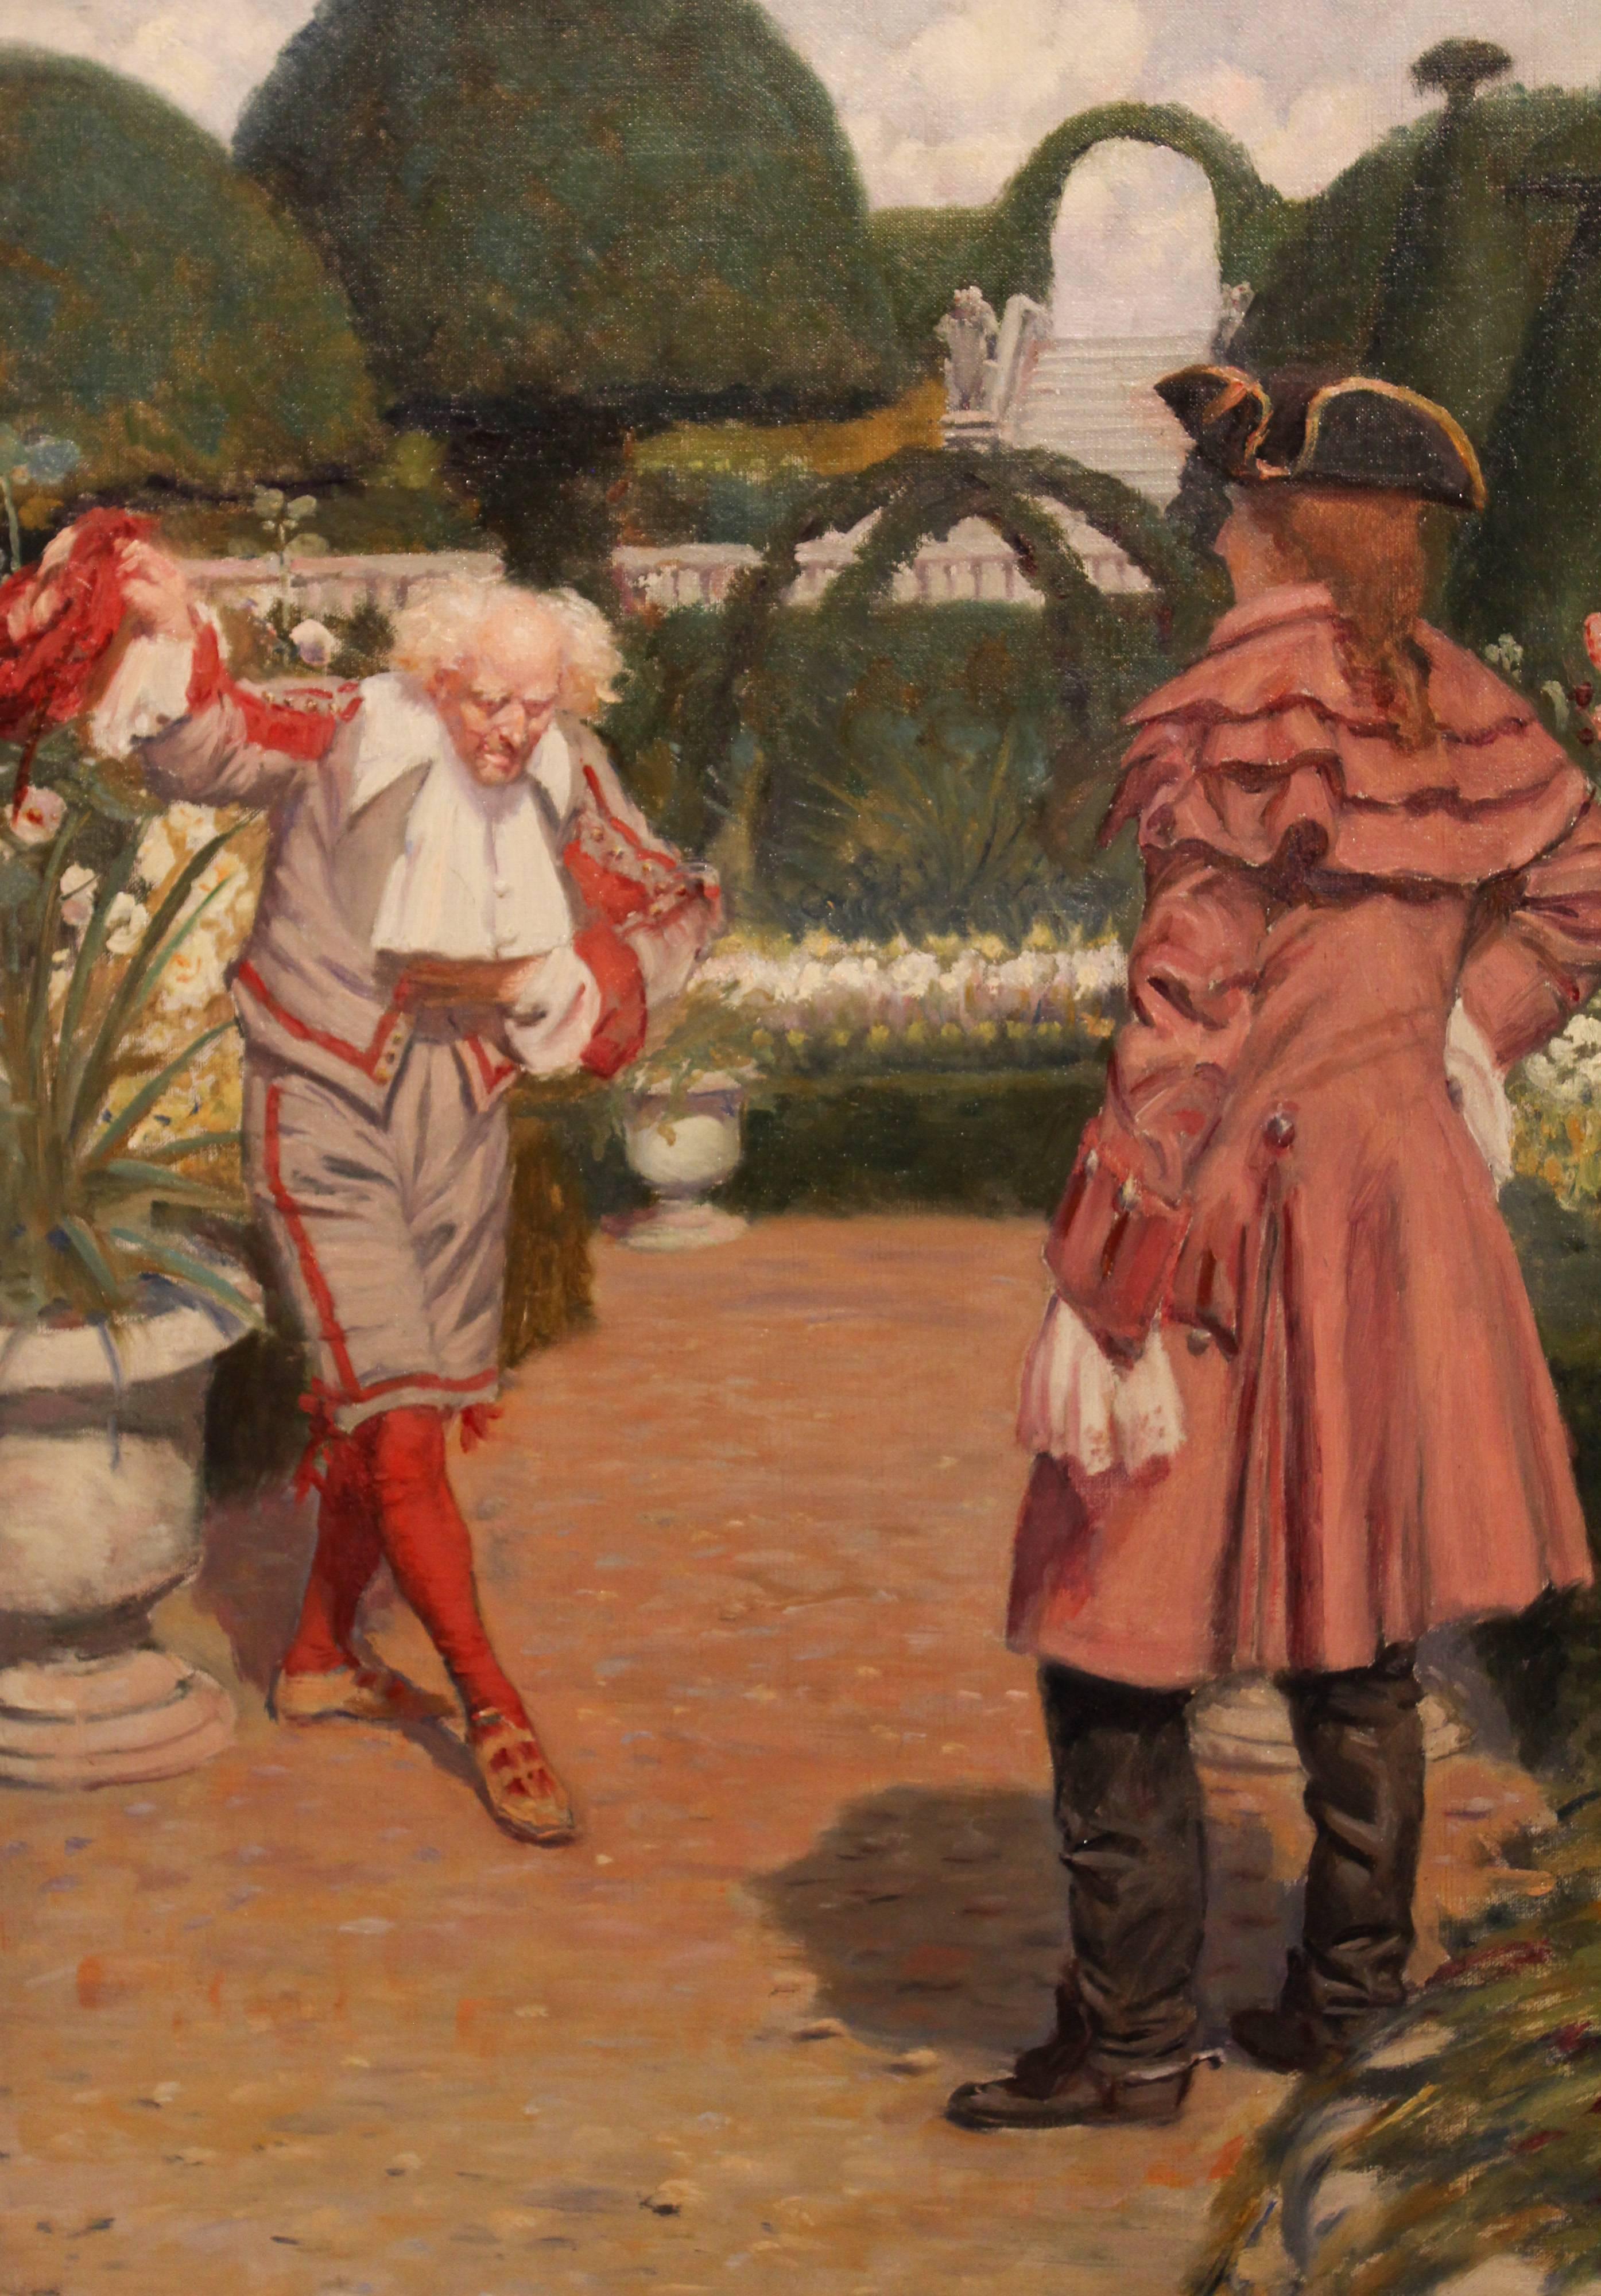 "A Courtly Meeting" Oil Painting by Simon Vedder. Simon Harmon Vedder, 1866-1937 was a US born animal and figure painter, exhibited at Royal Academy. Oil on canvas, 21x15" signed.

All of the items that we advertise for sale have